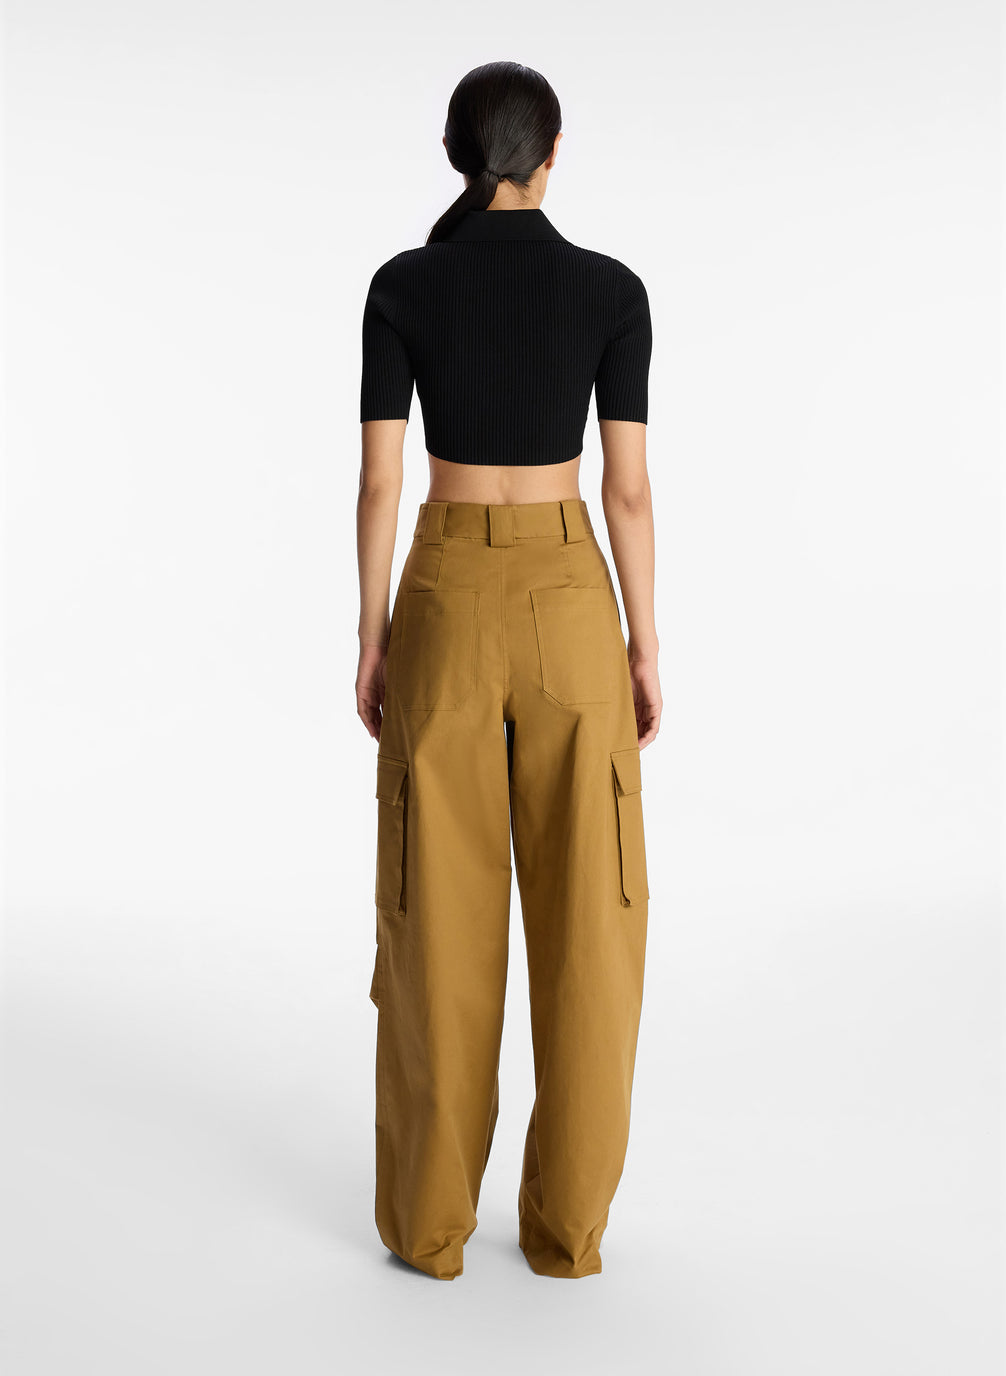 back view of woman wearing black cropped collared knit shirt and tan cargo pants